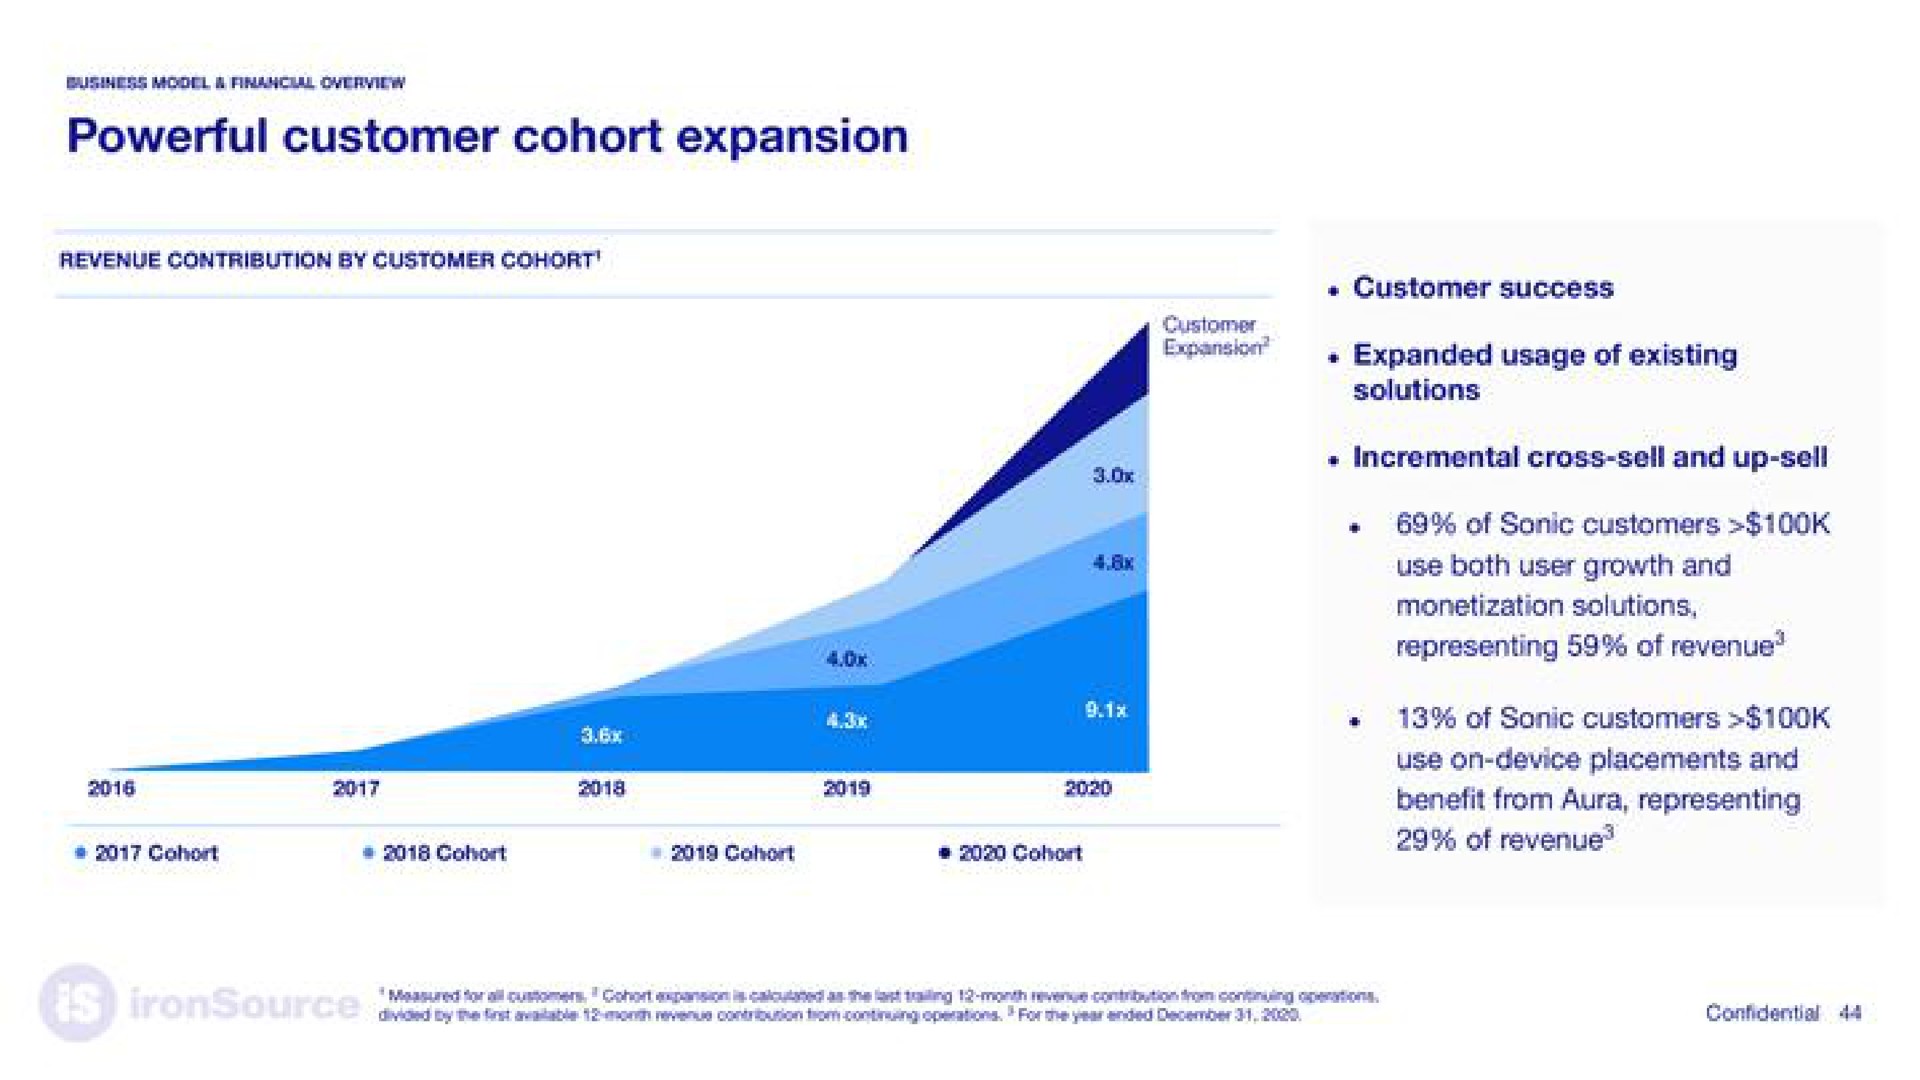 powerful customer cohort expansion benefit from aura representing any a at | ironSource